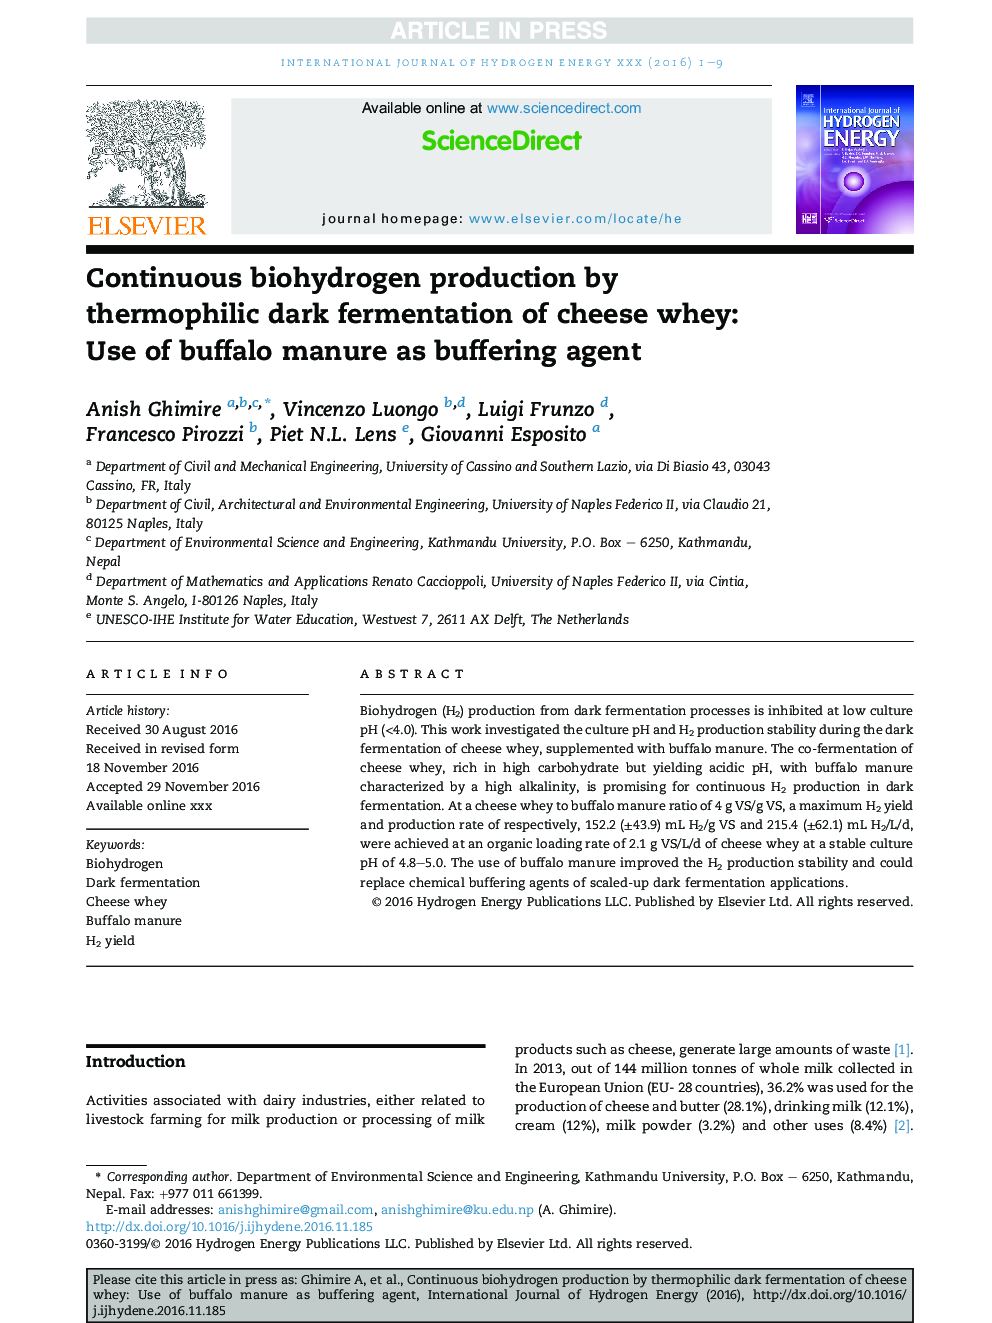 Continuous biohydrogen production by thermophilic dark fermentation of cheese whey: Use of buffalo manure as buffering agent